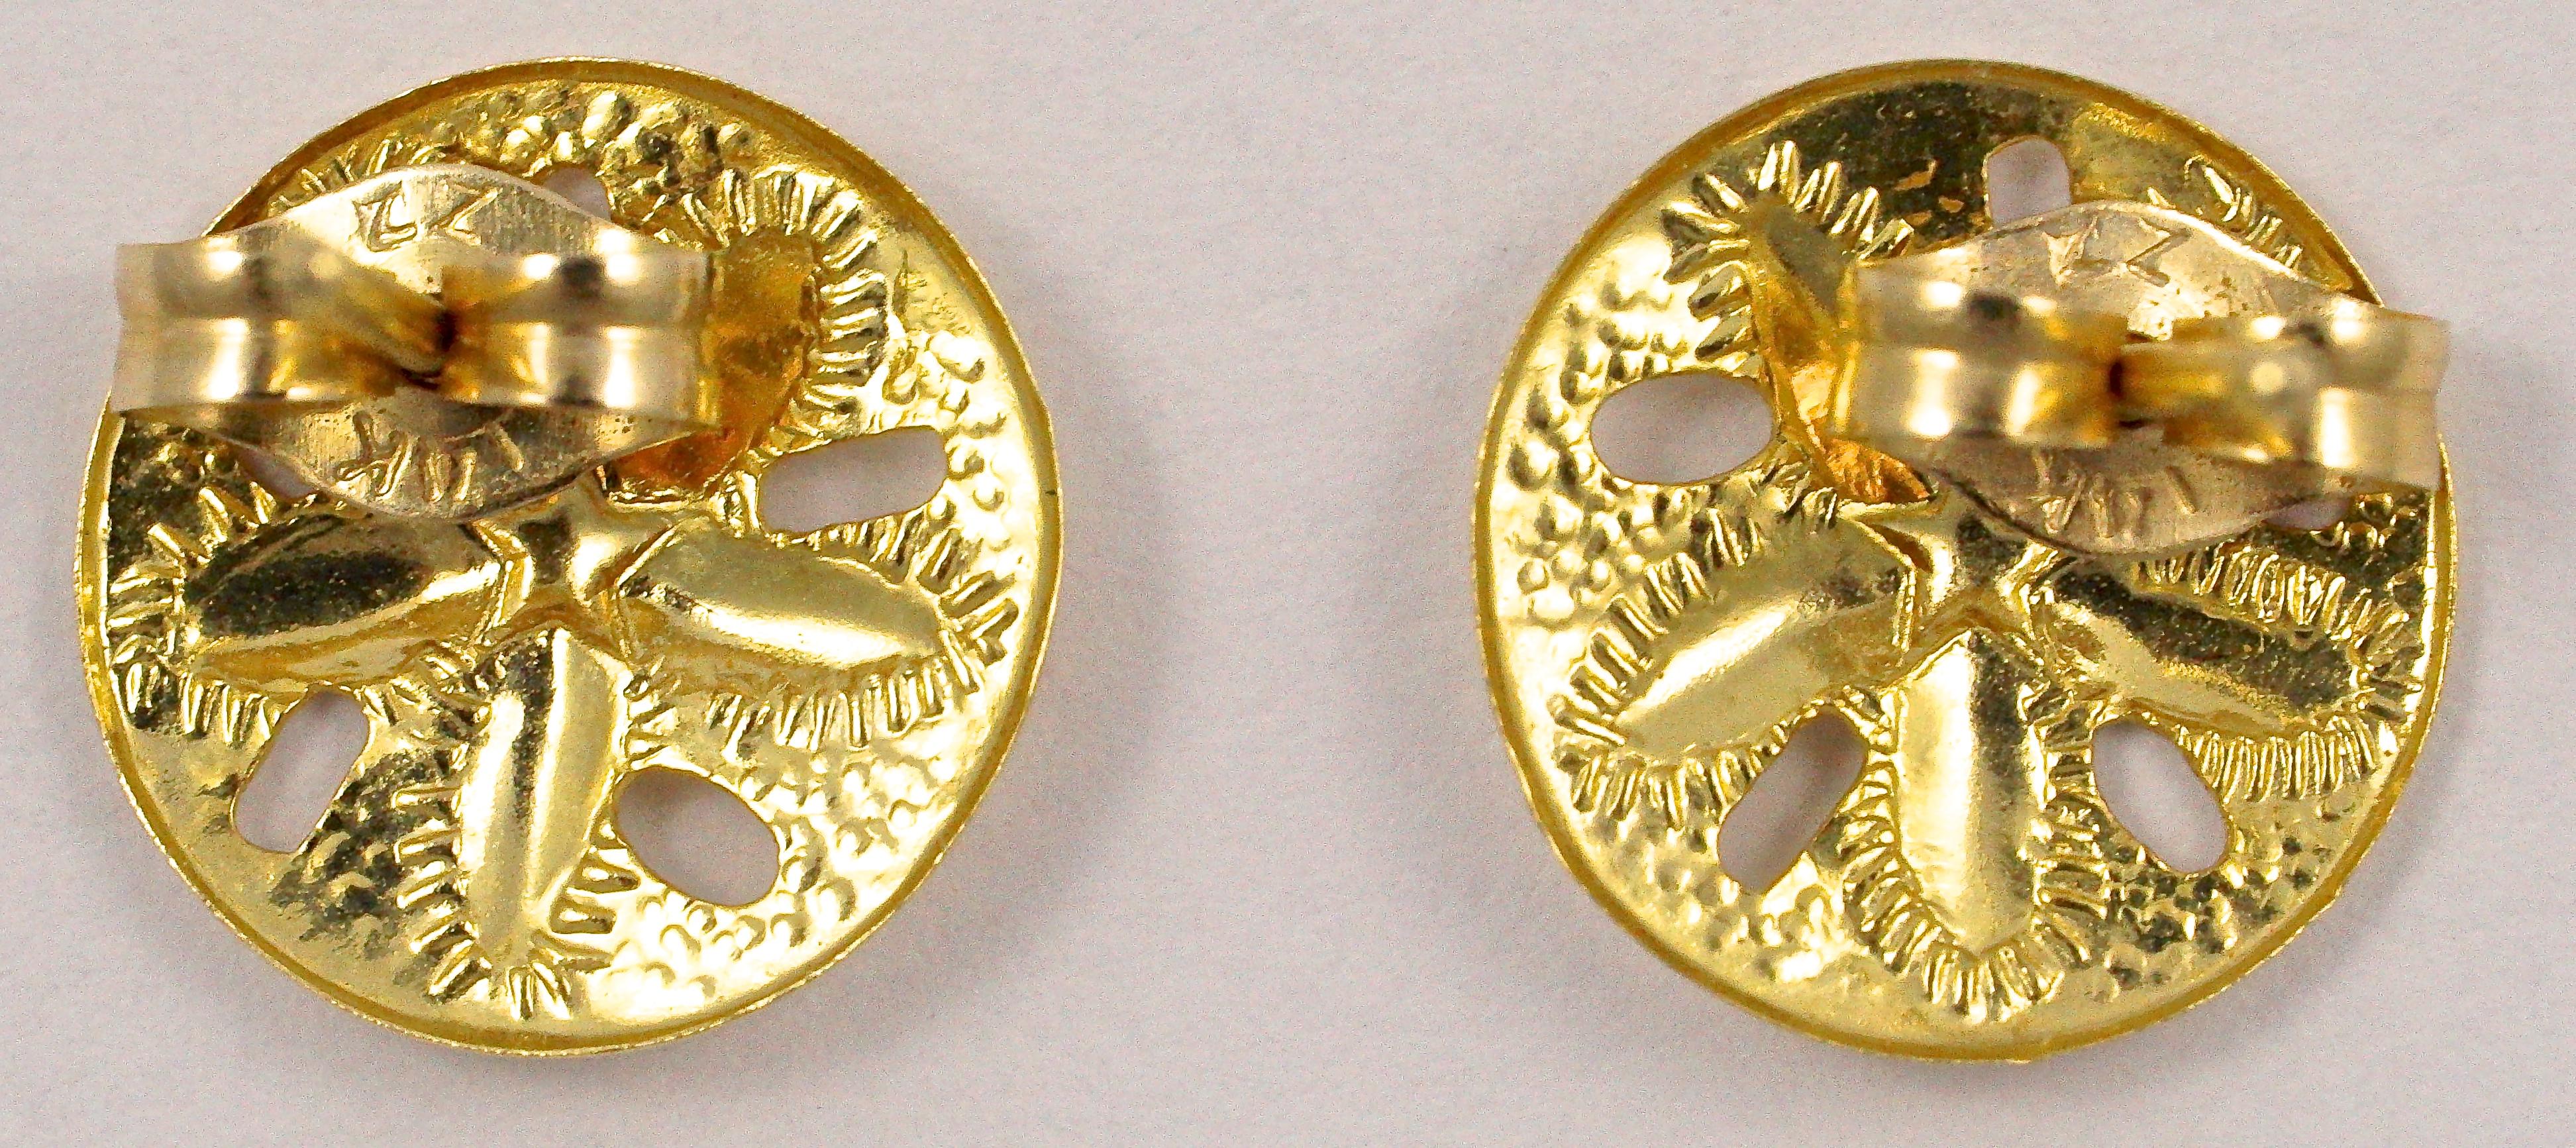 ZZ 14K gold round stud earrings with butterfly backs, and featuring a textured and shiny sand dollar design. The earrings measure diameter 9mm / .35 inch, and weigh .4 gram.

This is a lovely pair of gold earrings in an unusual and attractive sand